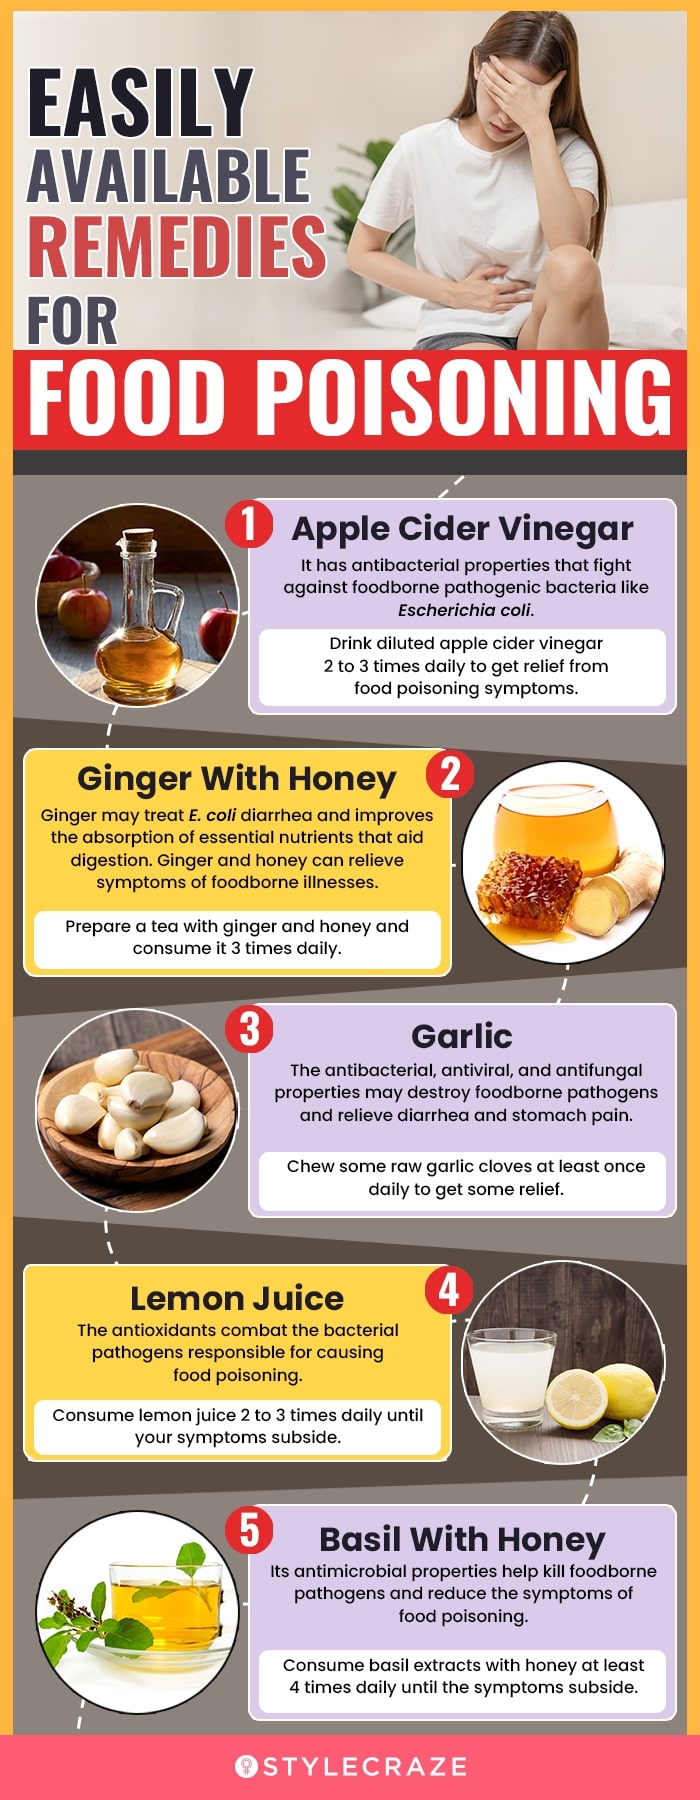 easily available remedies for food poisoning (infographic)